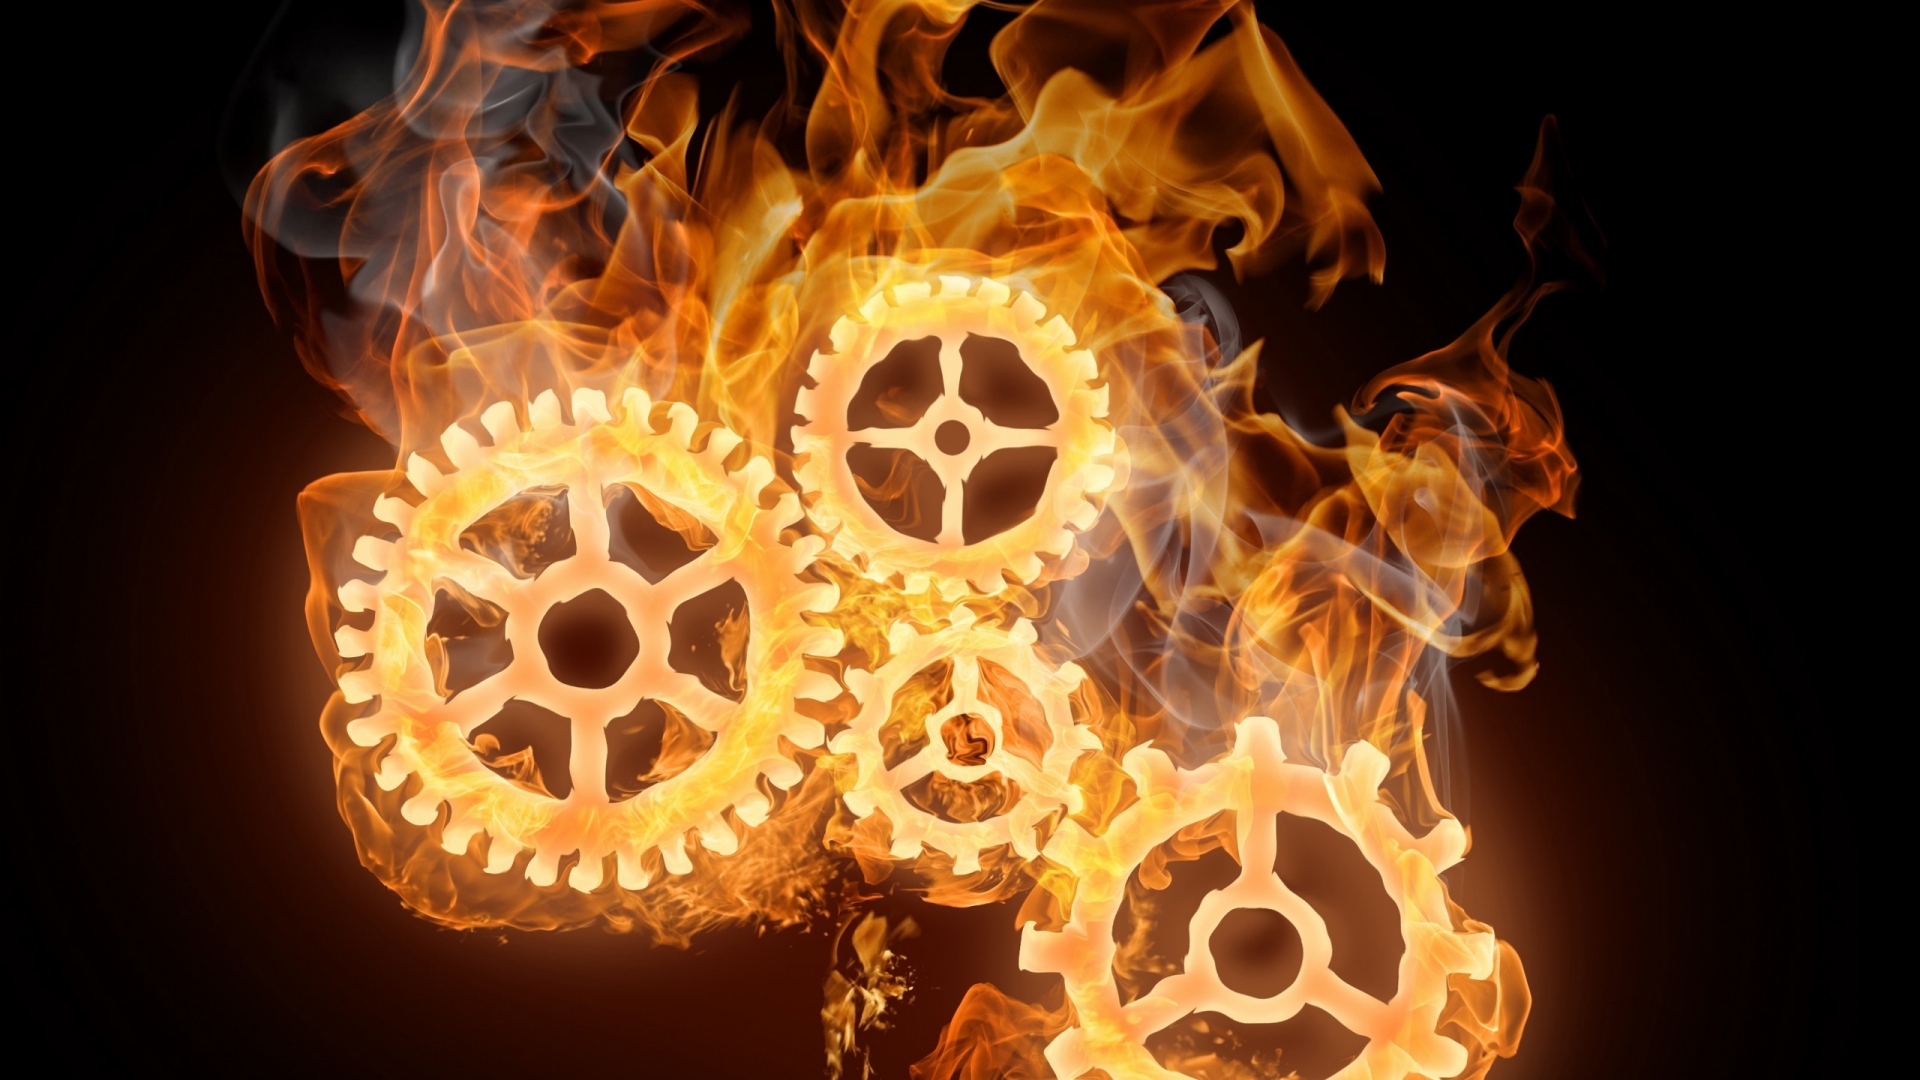 Wheels on Fire for 1920 x 1080 HDTV 1080p resolution